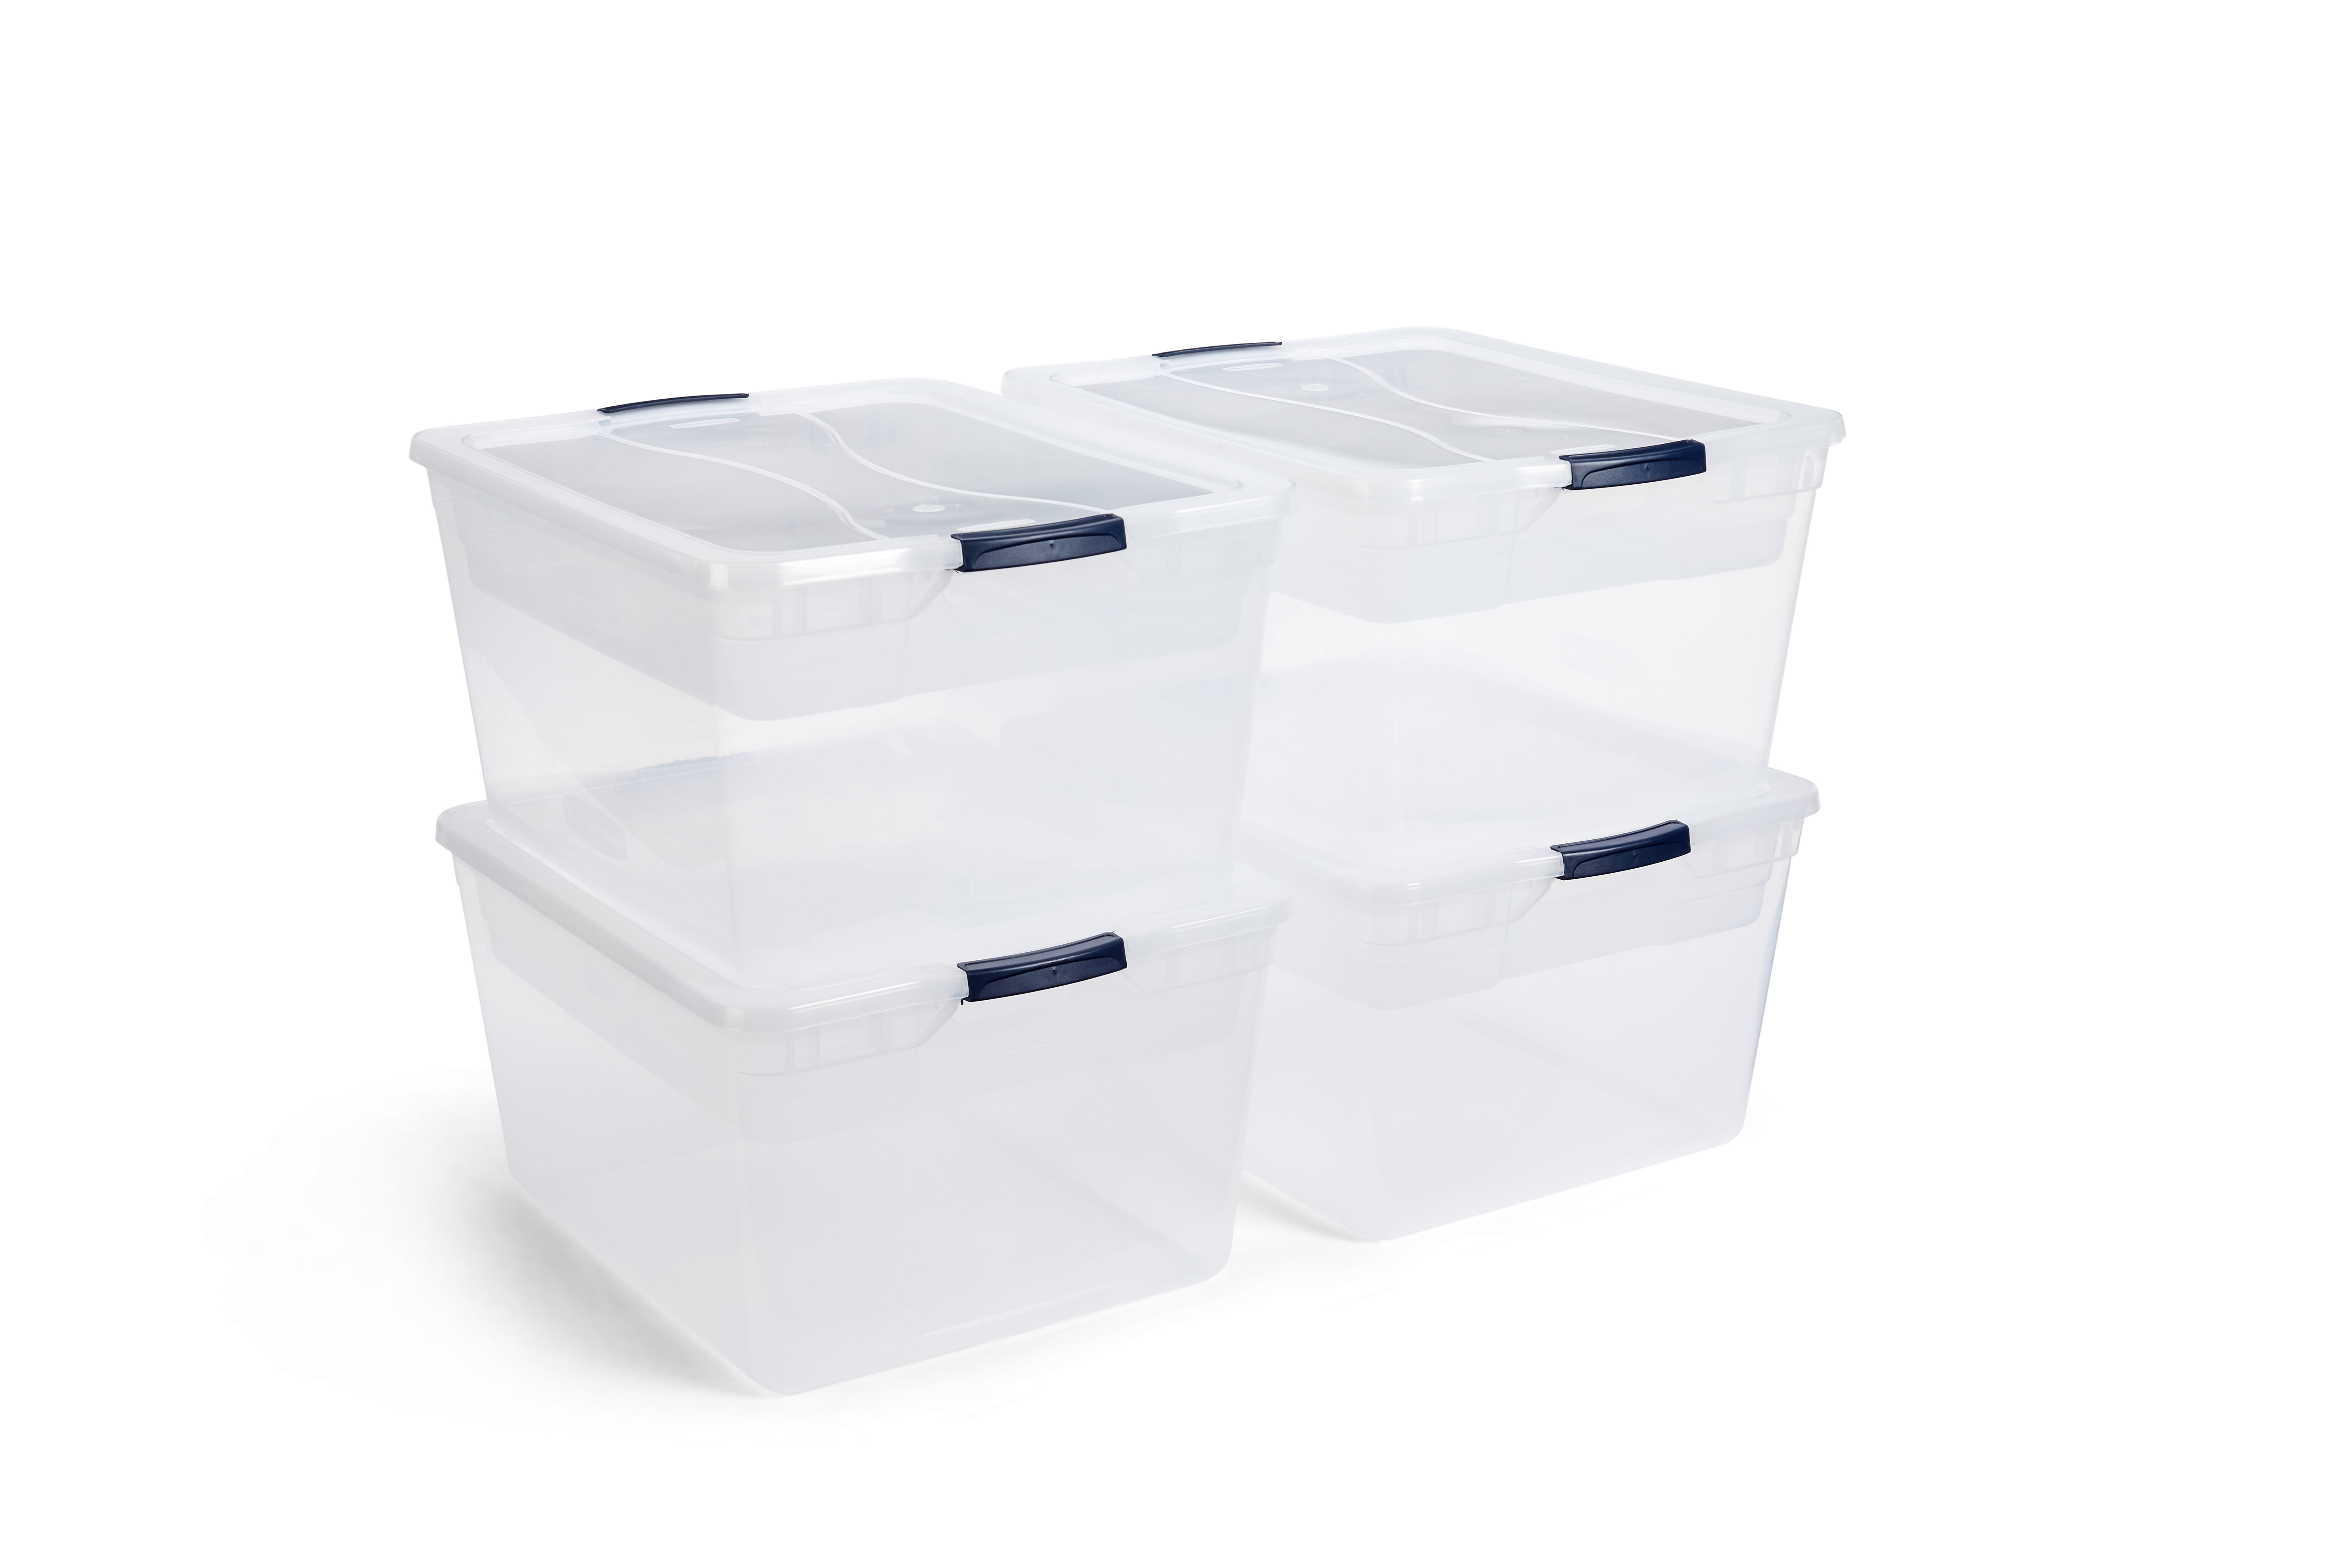 Rubbermaid Cleverstore Under the Bed Wheeled Storage Box, 68 qt. 2-Pack  RMUB170000 - The Home Depot